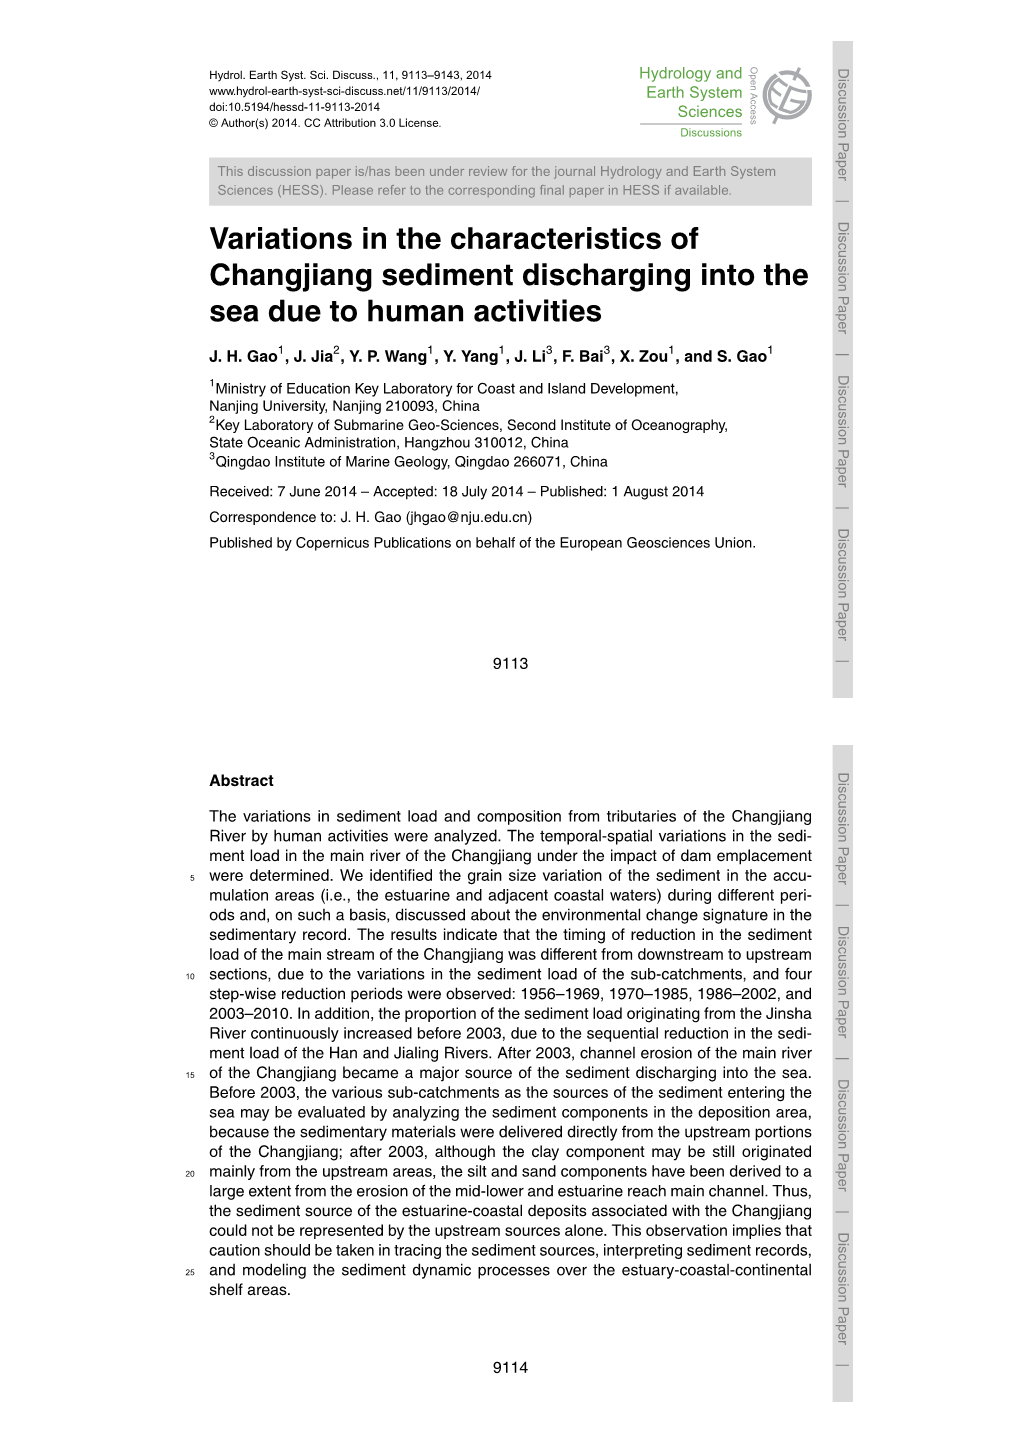 Variations in the Characteristics of Changjiang Sediment Discharging Into the Sea Due to Human Activities J